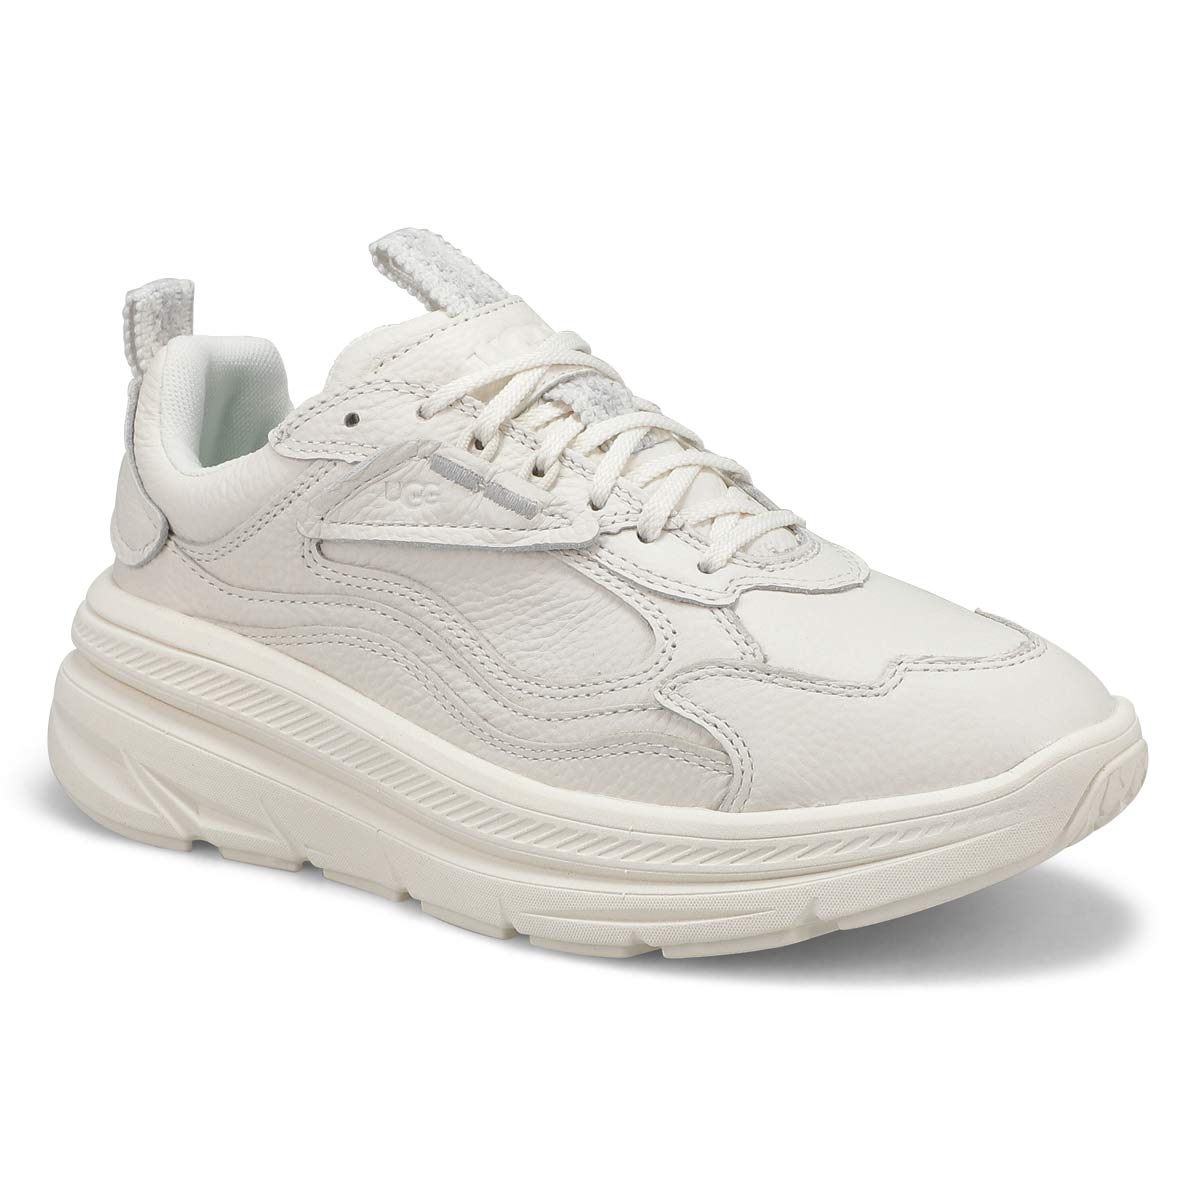 UGG Women's CA1 Lace Up Sneaker -White | SoftMoc.com